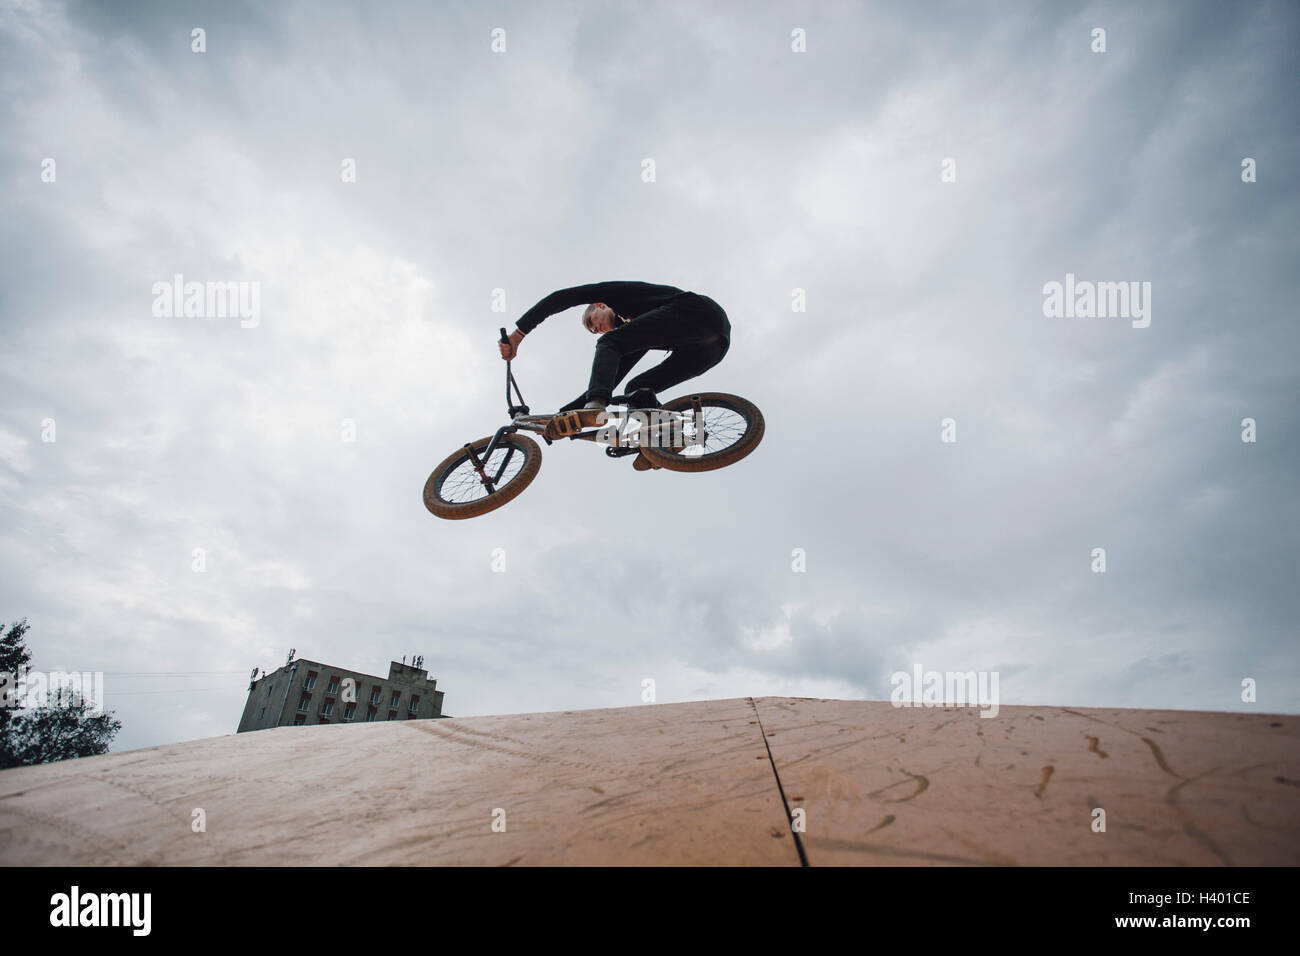 Low angle view of teenager performing stunt during BMX cycling against cloudy sky Stock Photo